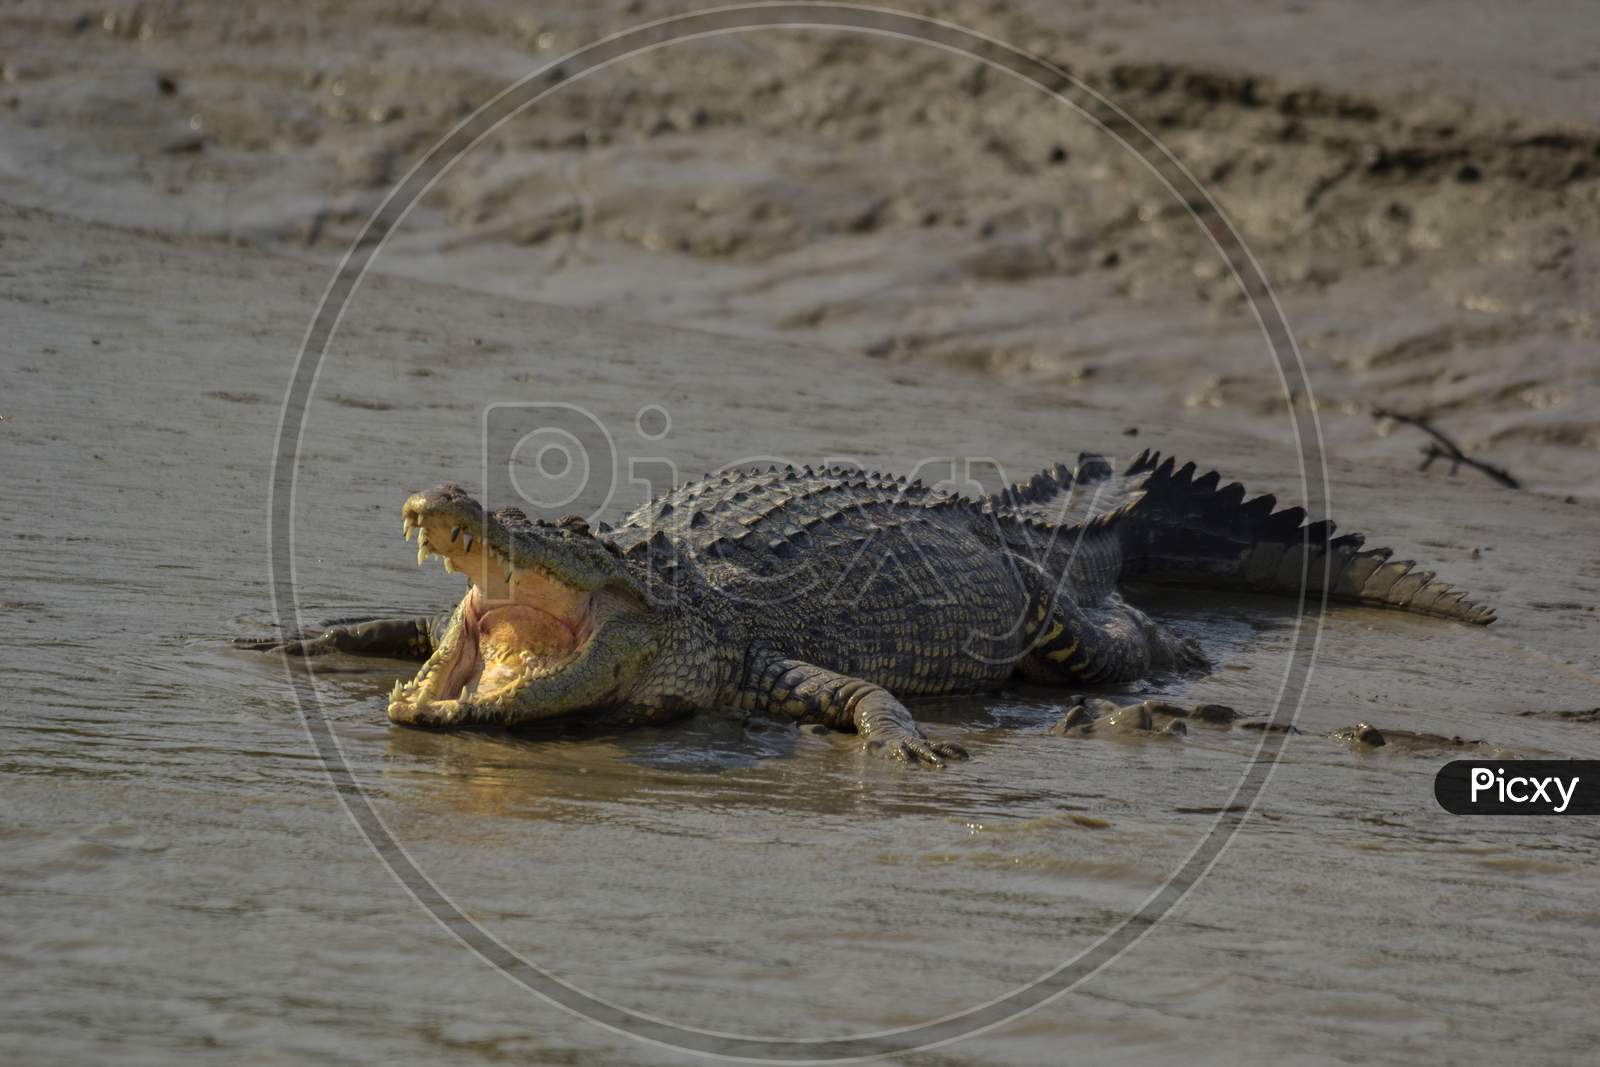 A Hugh Salt Water Crocodile Opened Its Mouth For Basking Using Morning Sunlight